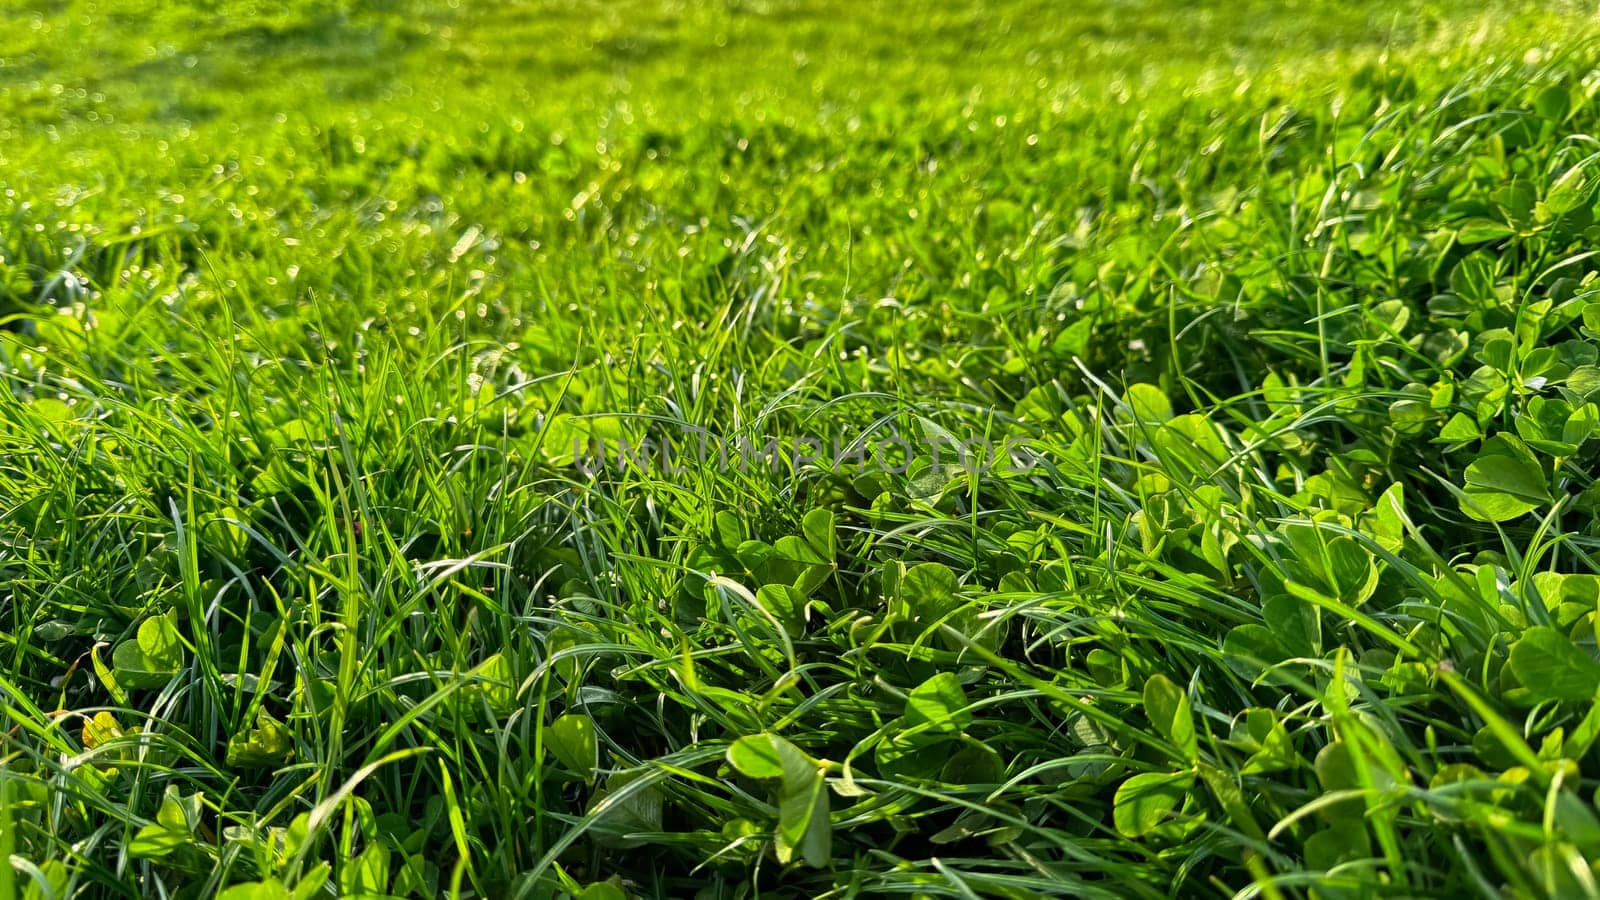 Background natural fresh green grass and clover leaves close up. Luminous dewy lawn, spring freshness, nature detail with morning light concept for design and print. by Lunnica